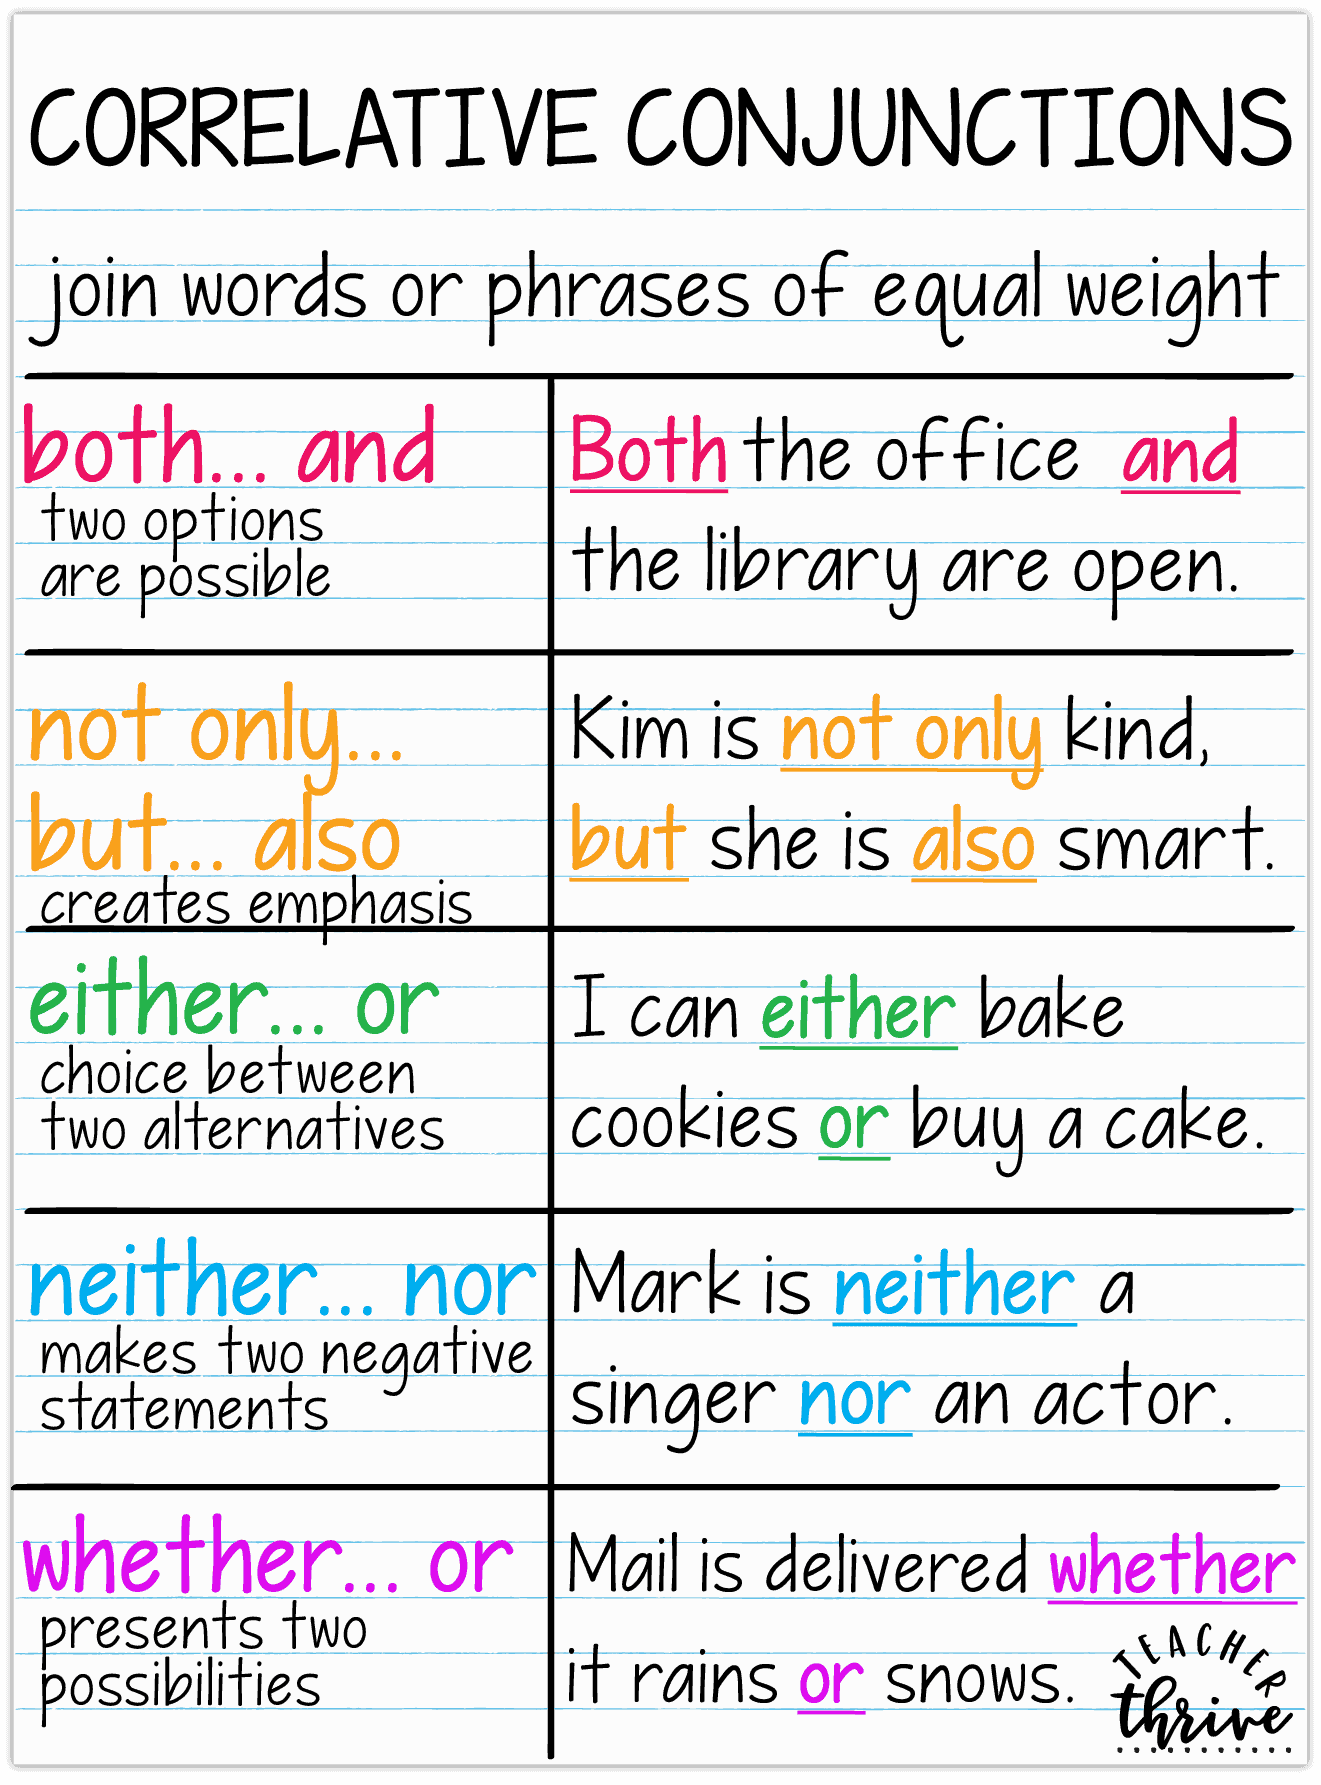 Subject Verb Agreement With Correlative Conjunctions Worksheet